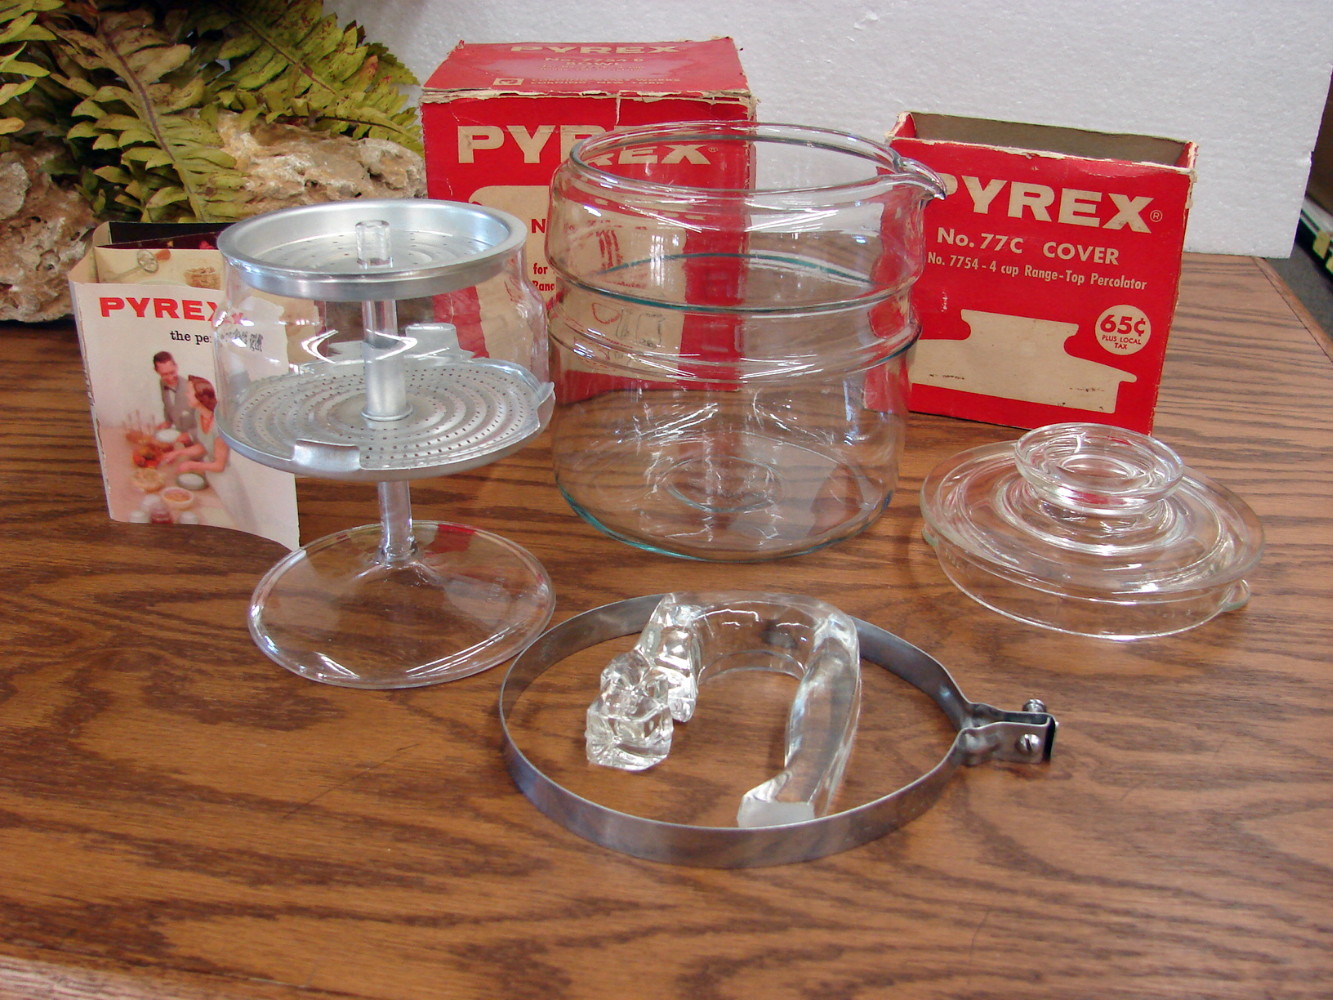 Vintage Pyrex Flameware Glass 4 Cup Coffee Percolator Pot 7754 Pot and Lid  Only 